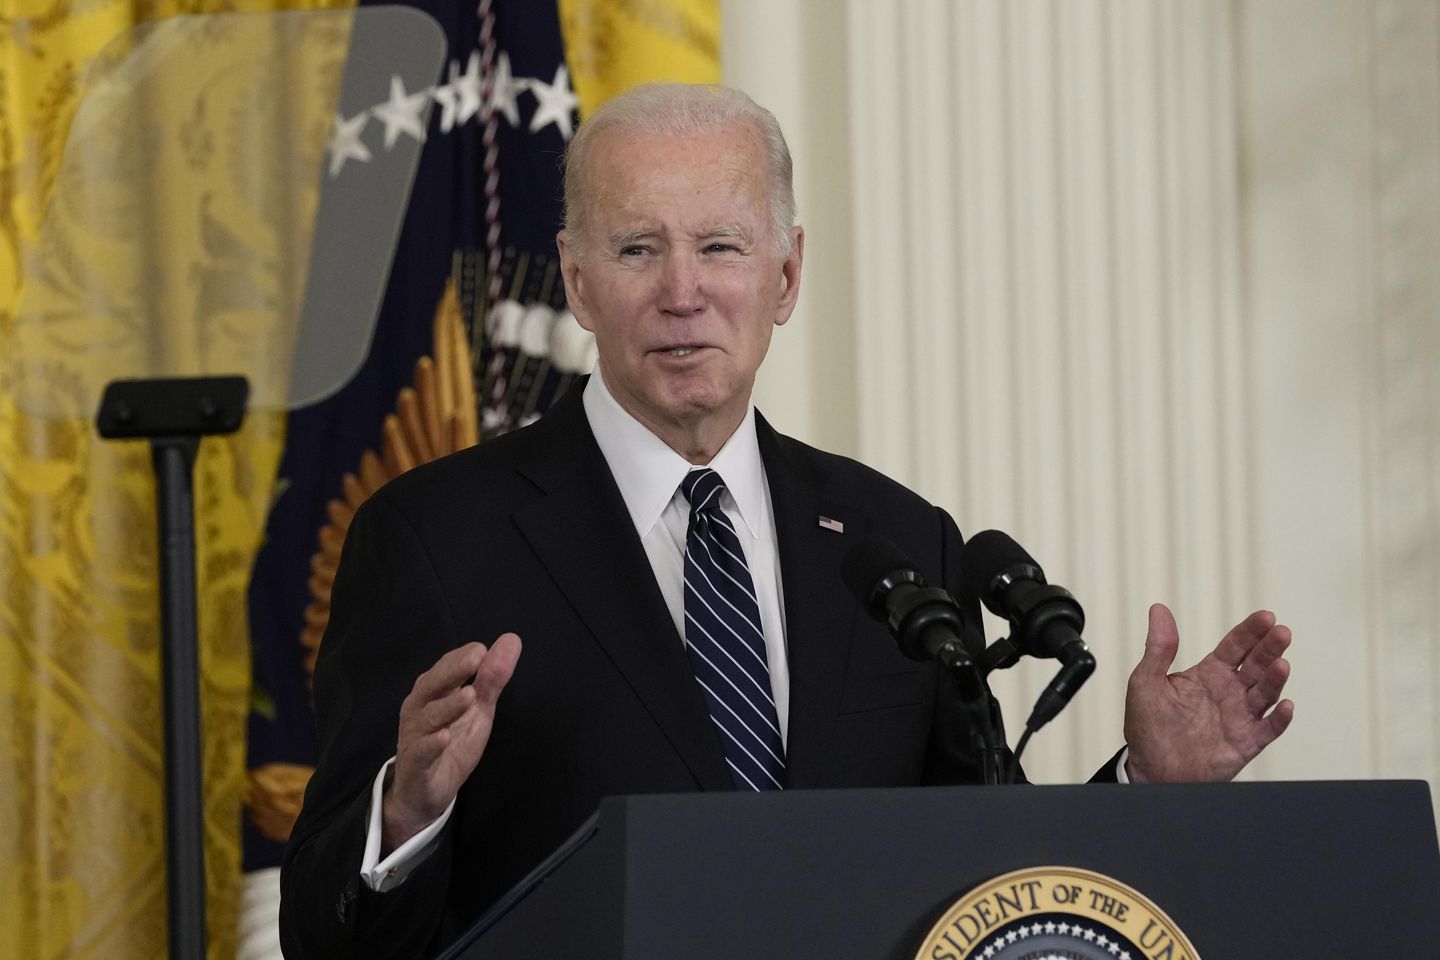 Biden Hails DHS Service Record on Department’s Post-9/11 20th Anniversary

End-shutdown